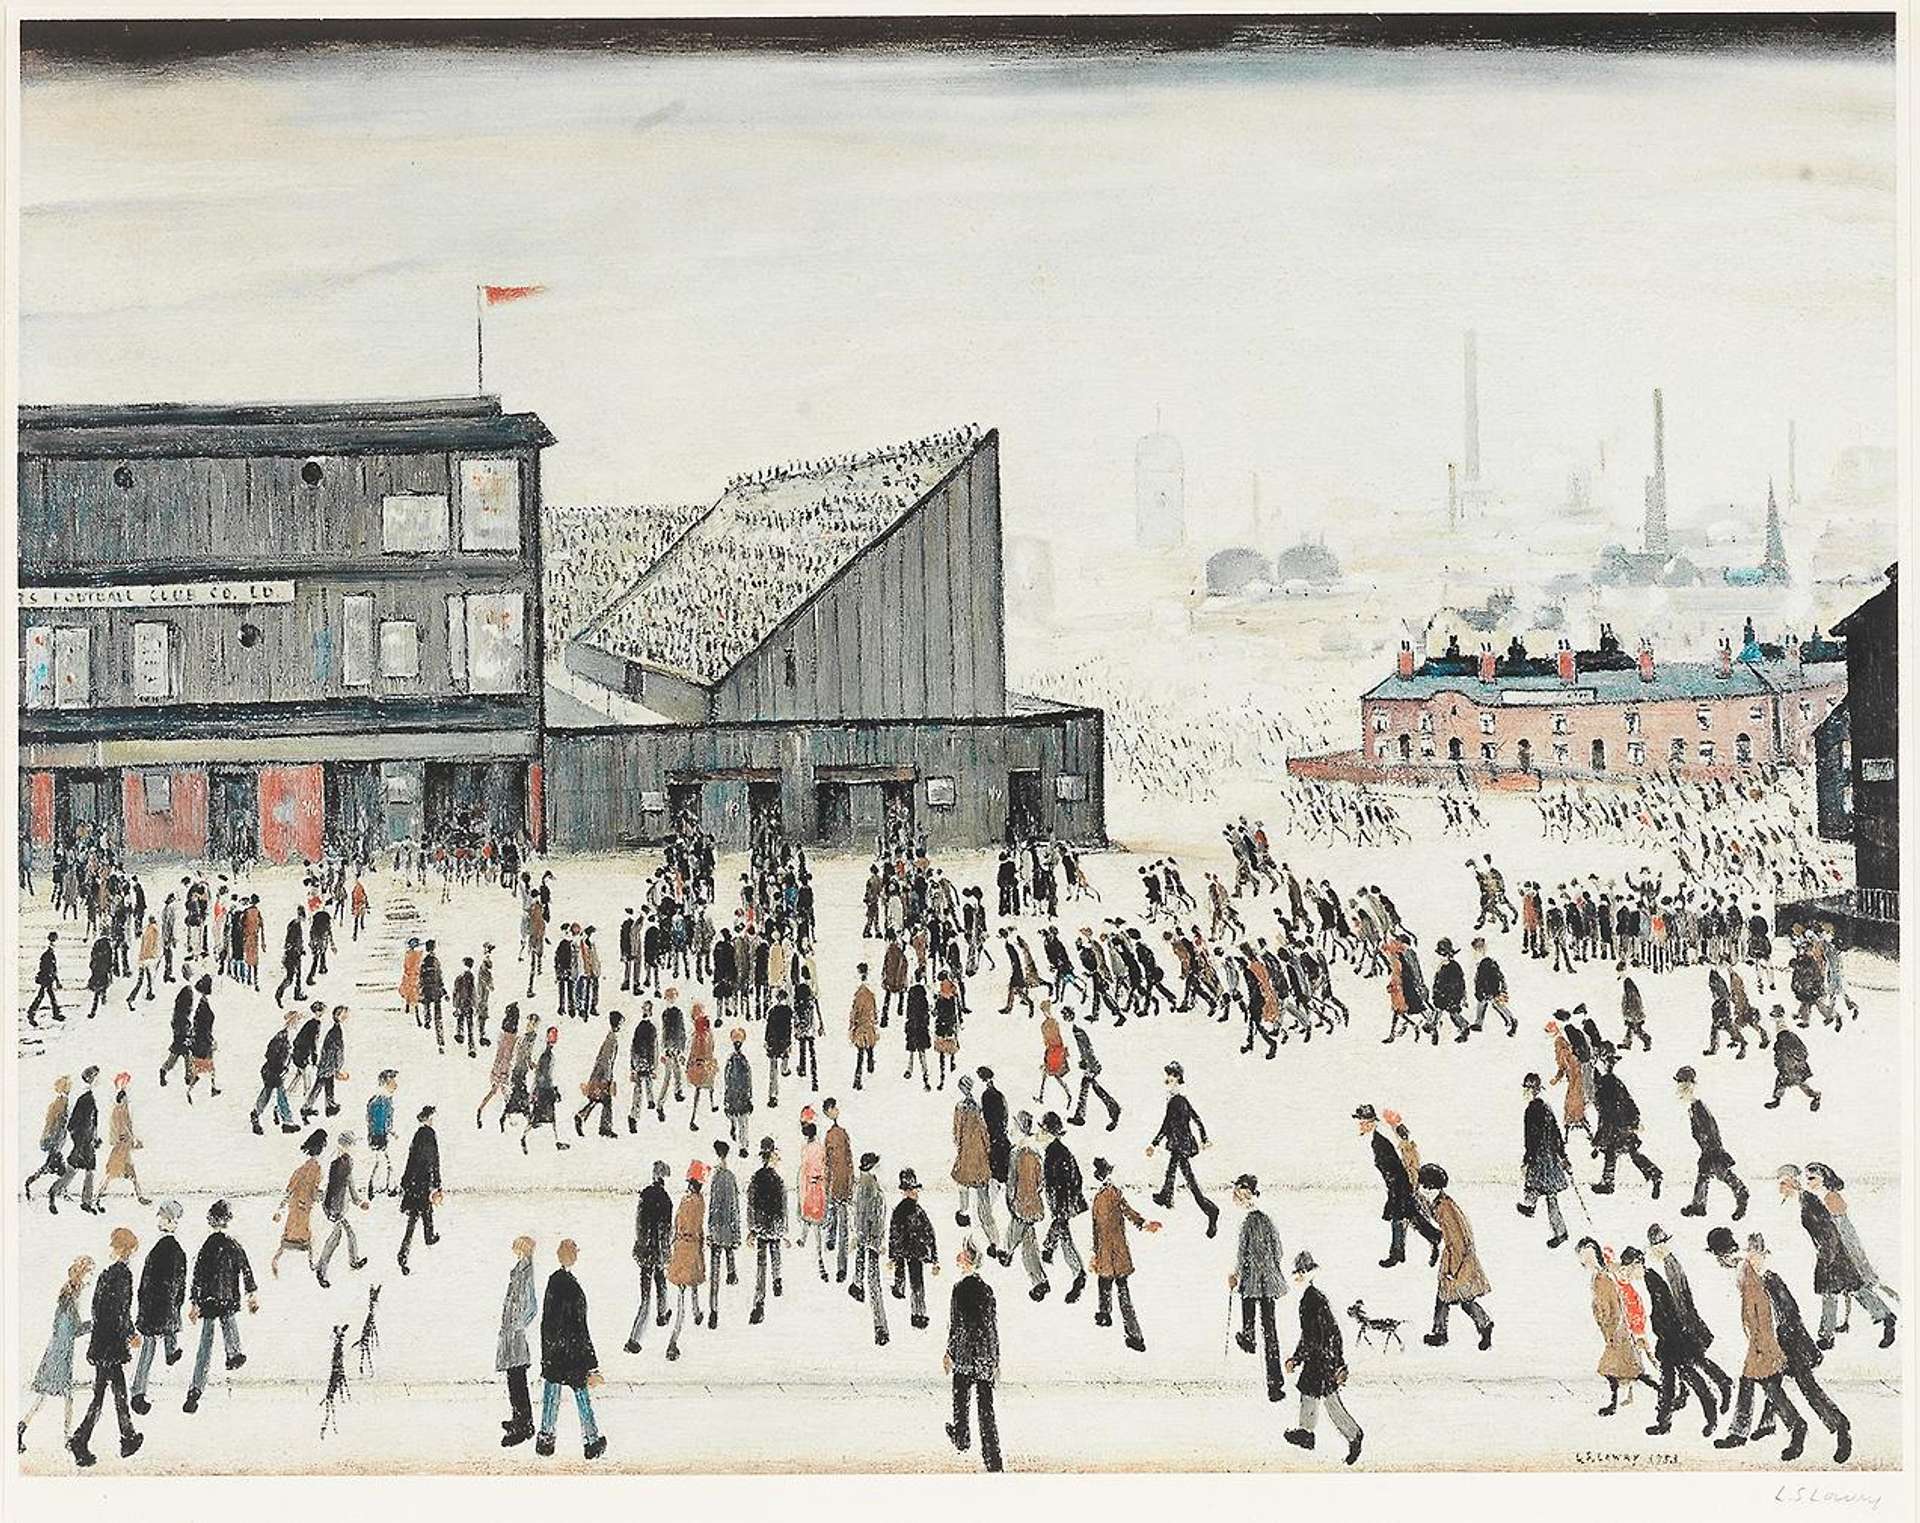 A depiction of hundreds of matchstick figures rushing toward the opening gates of the football in Northern England depicted in a muted colour palette. 